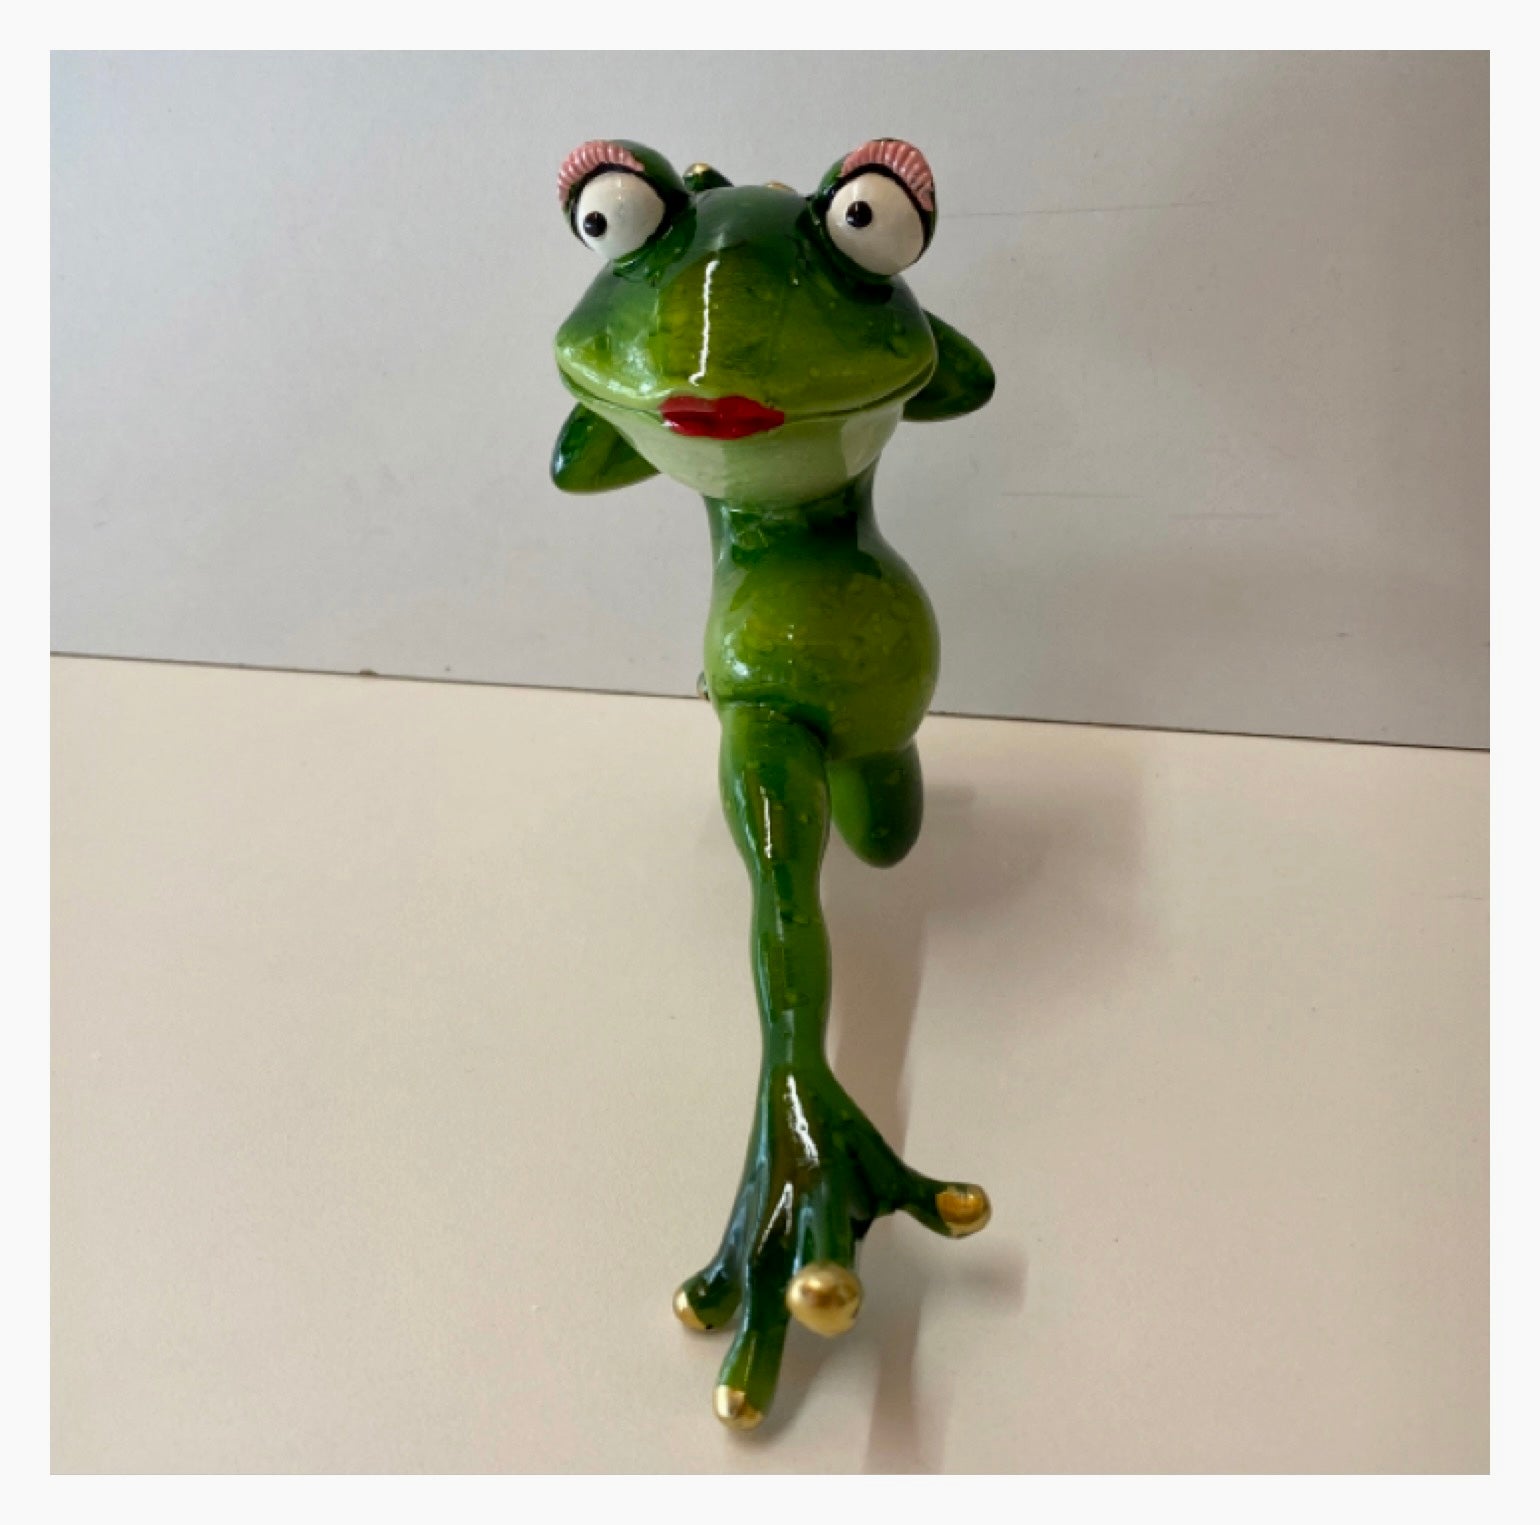 Frog Yoga Zen Stretch Ornament - The Renmy Store Homewares & Gifts 